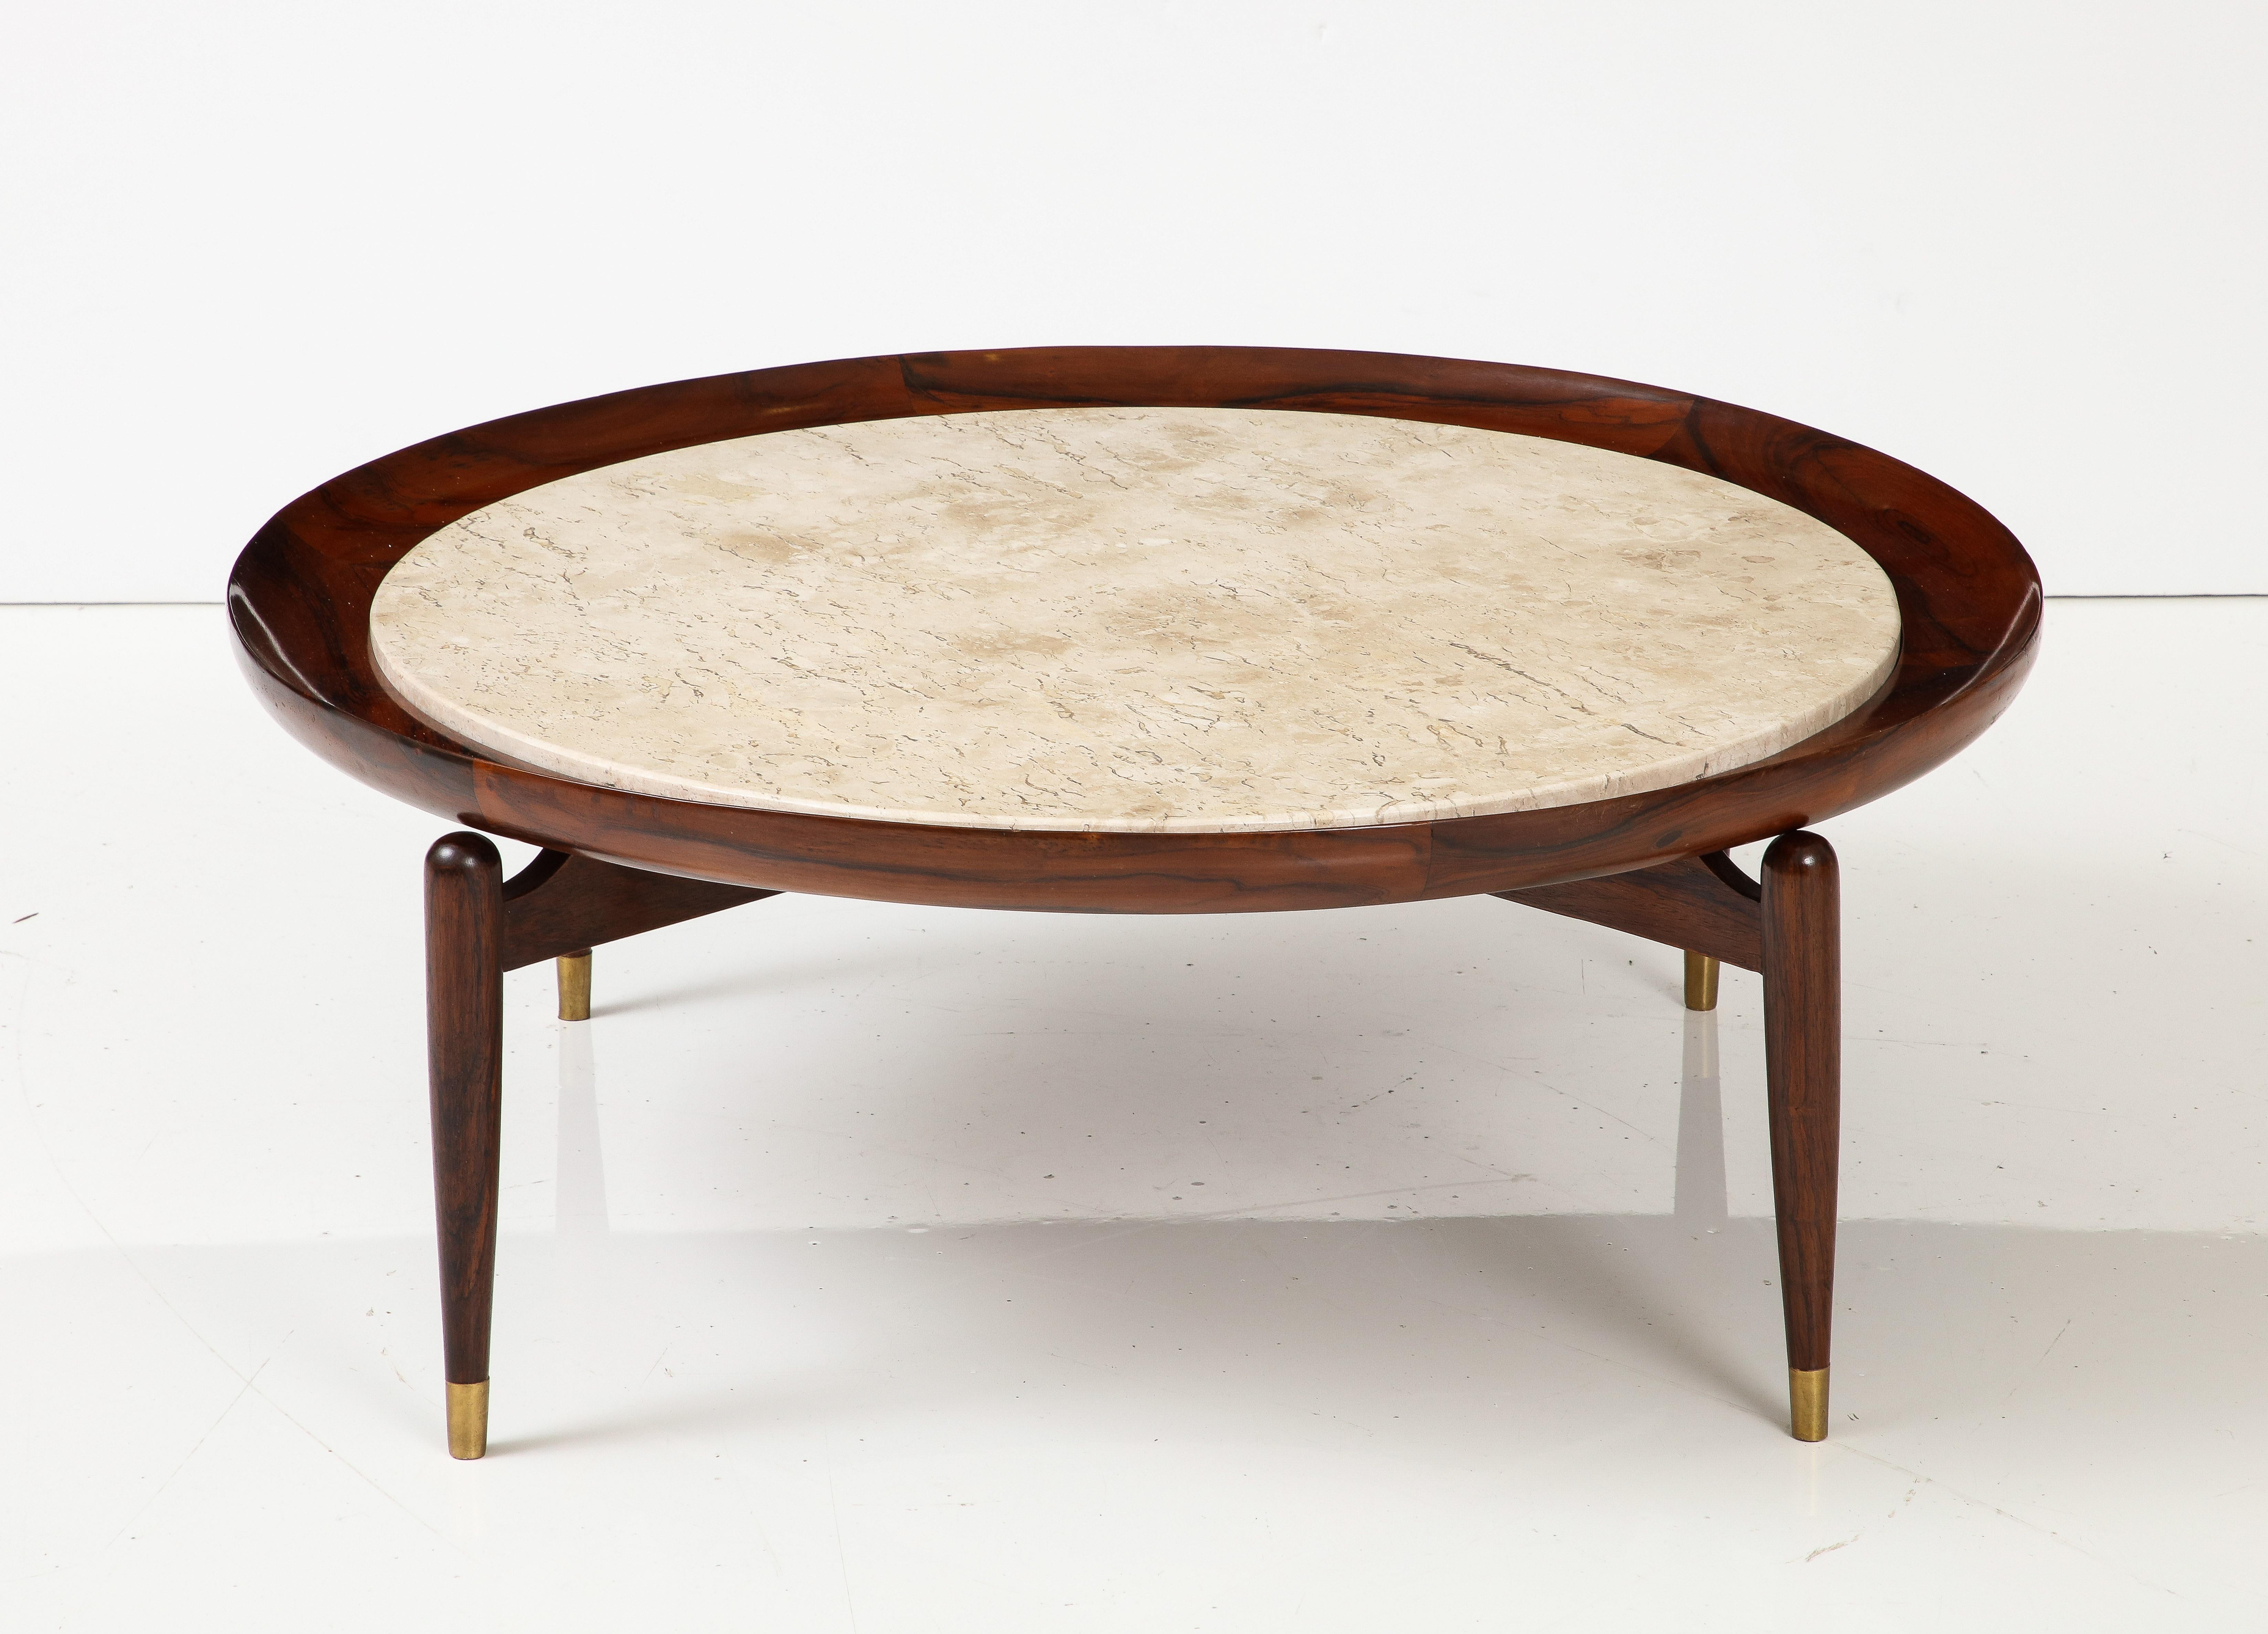 Mid-Century Modern marble top center table by Giuseppe Scapinelli, Brazil 1950s

The Giuseppe Scapinelli center table is a sophisticated piece of furniture that features an original Brazilian marble top. Structured in massive solid wood, this table